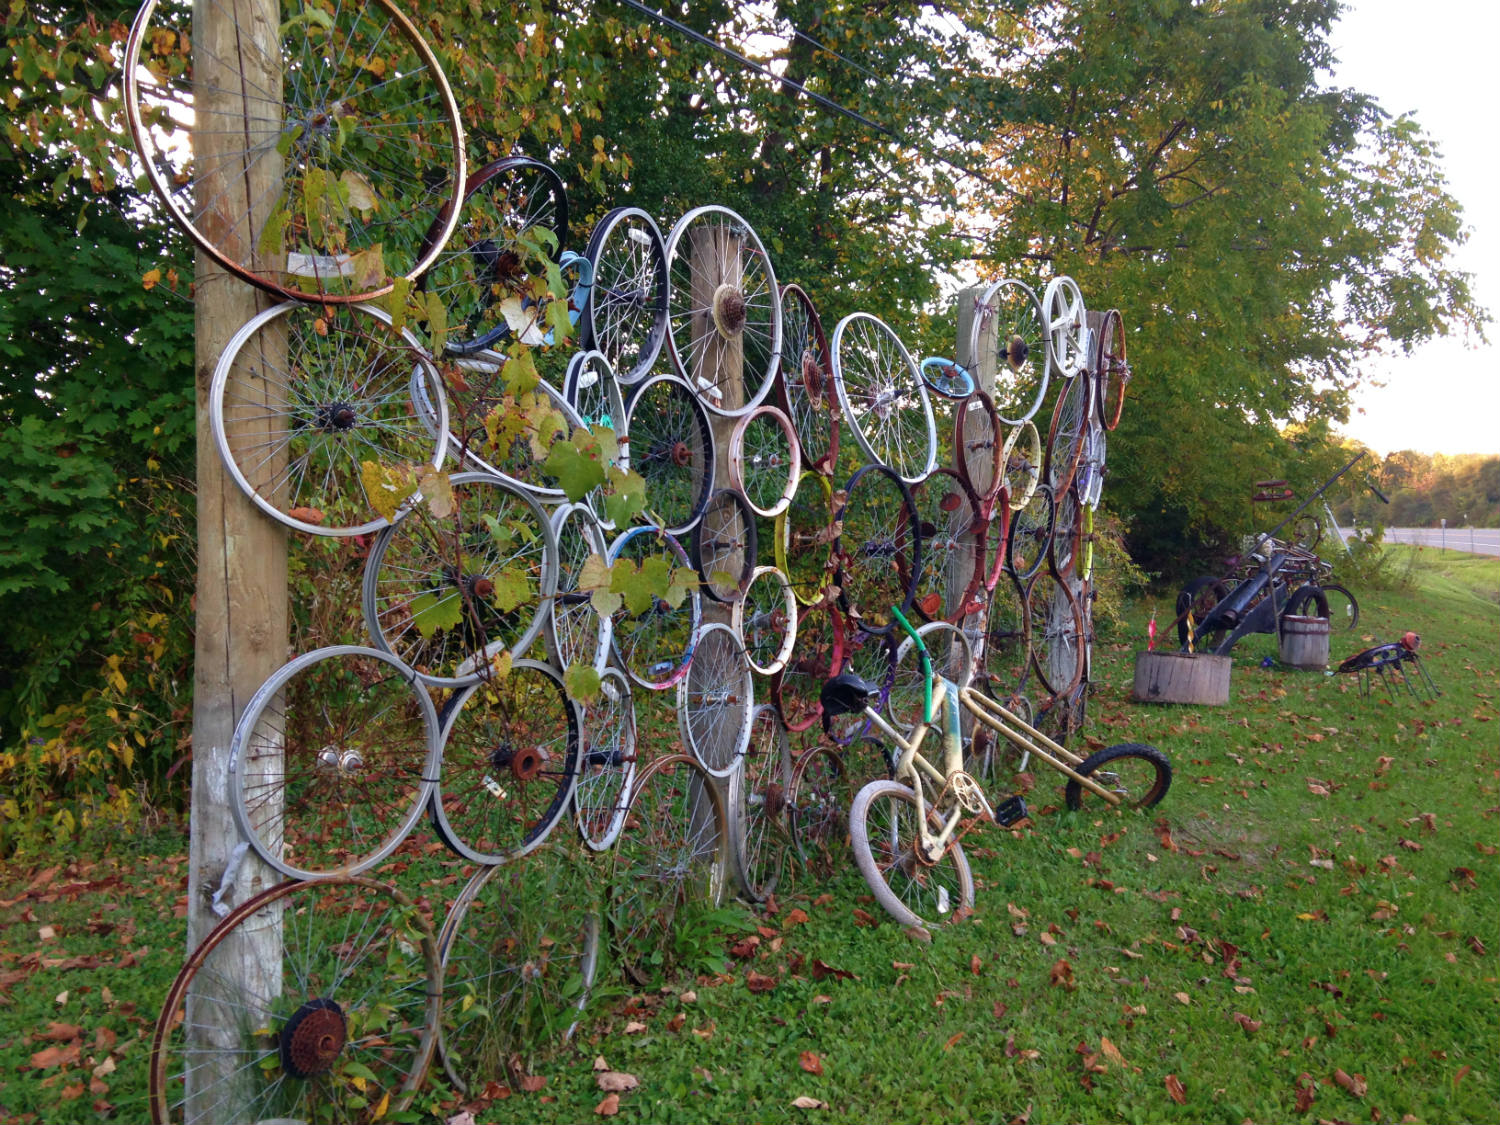 Bicycle Art and Yard Sculptures - Palmyra, NY side view of wheel fence